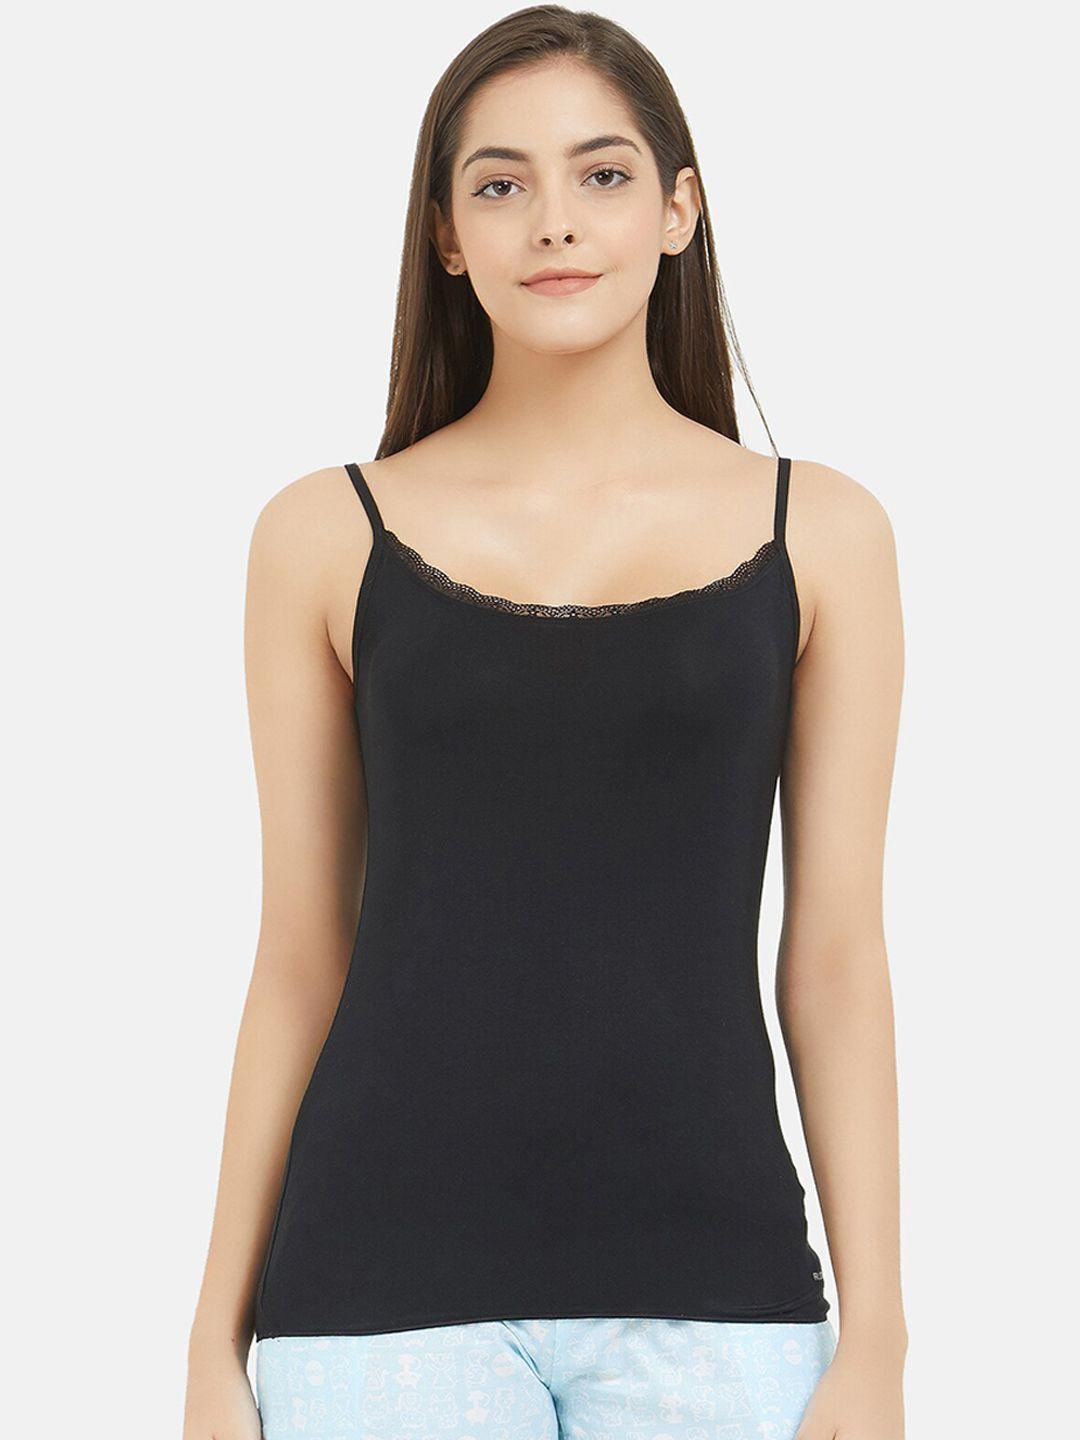 fruit of the loom women black solid camisole fcas04-a1s1